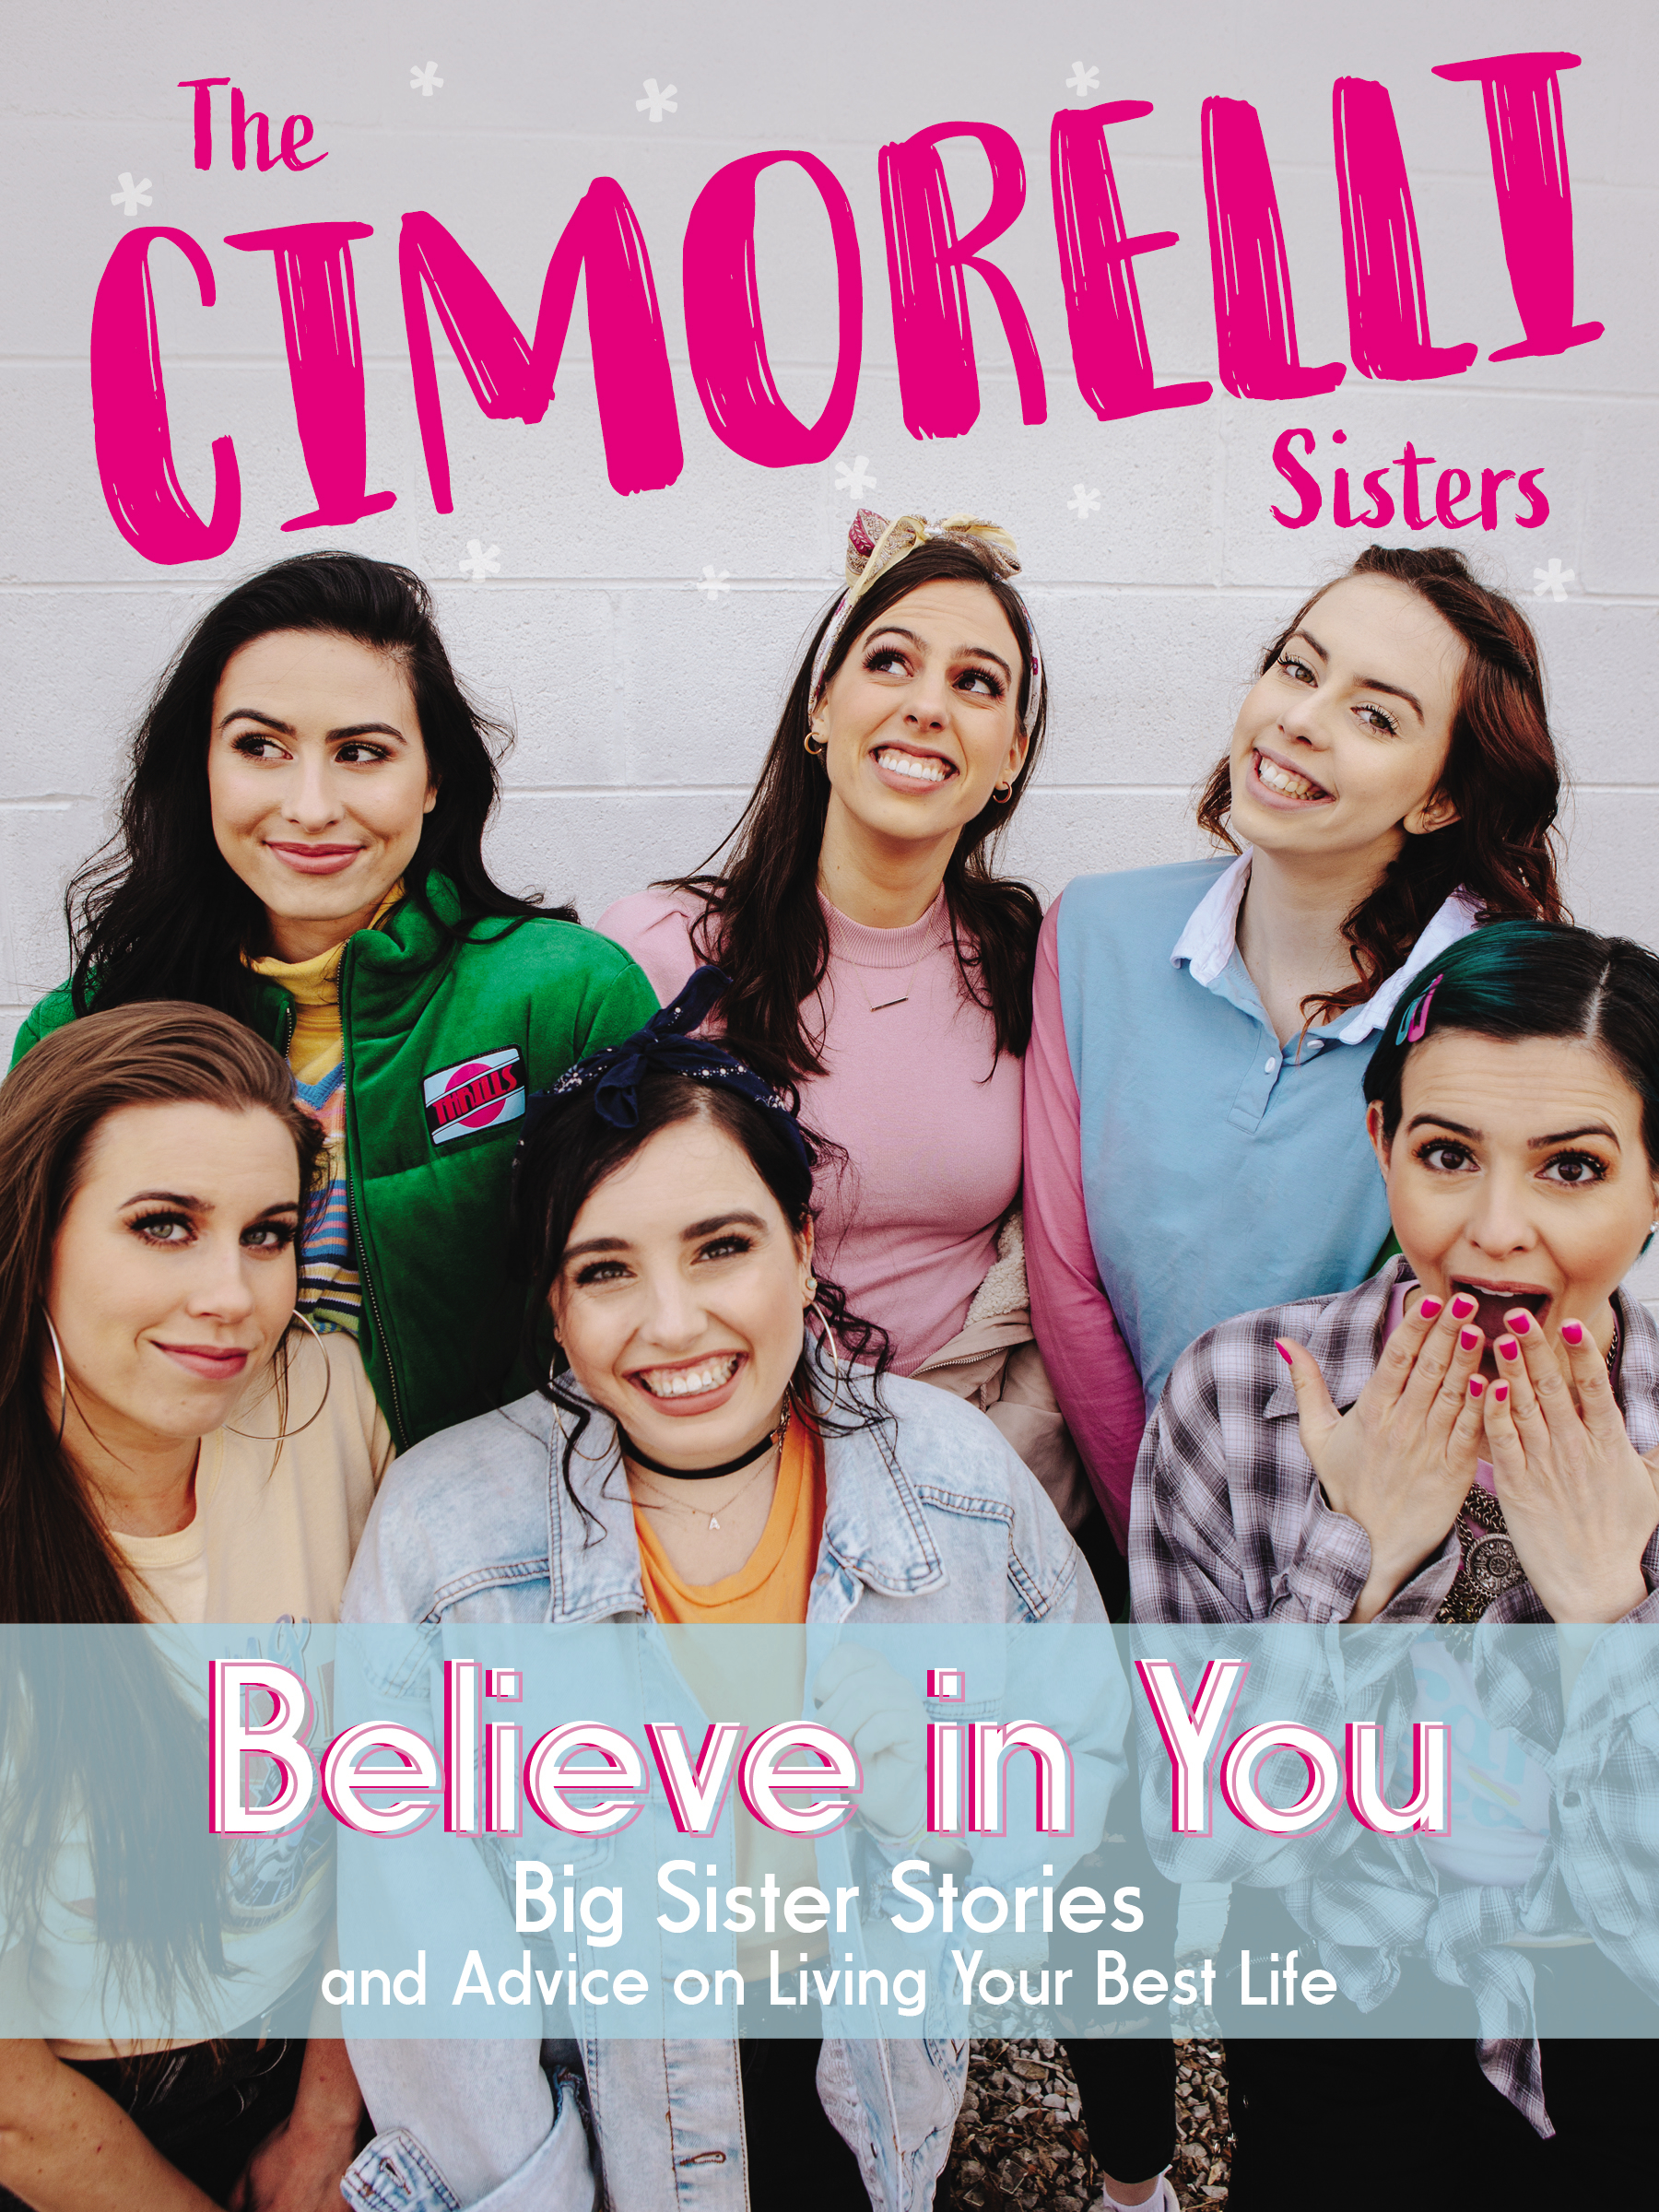 Believe in you cover image